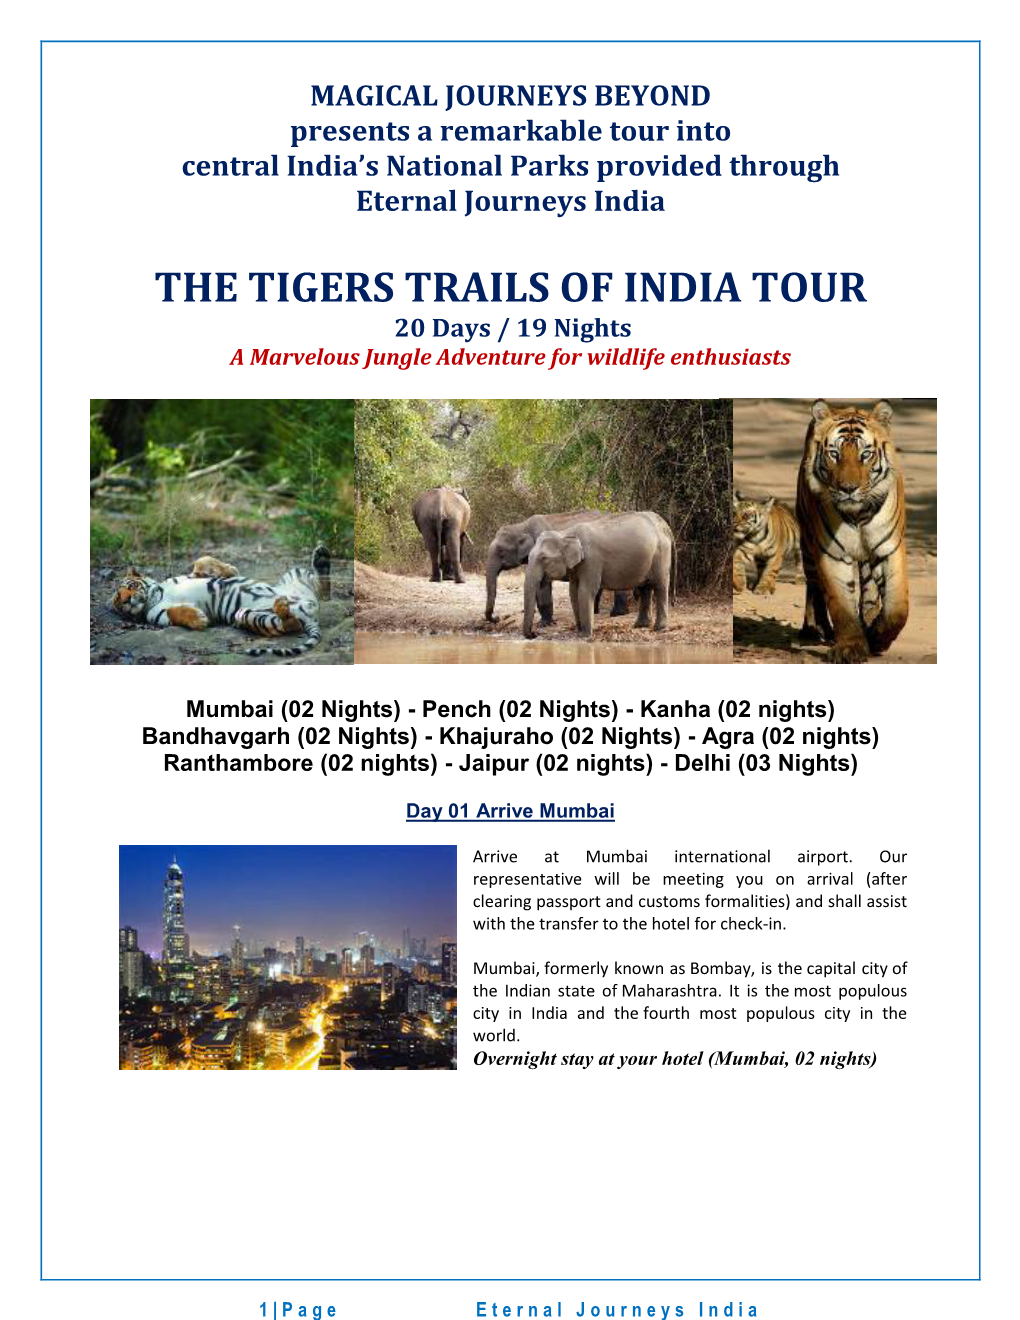 Review Magical Journeys Beyond's Tiger Trails